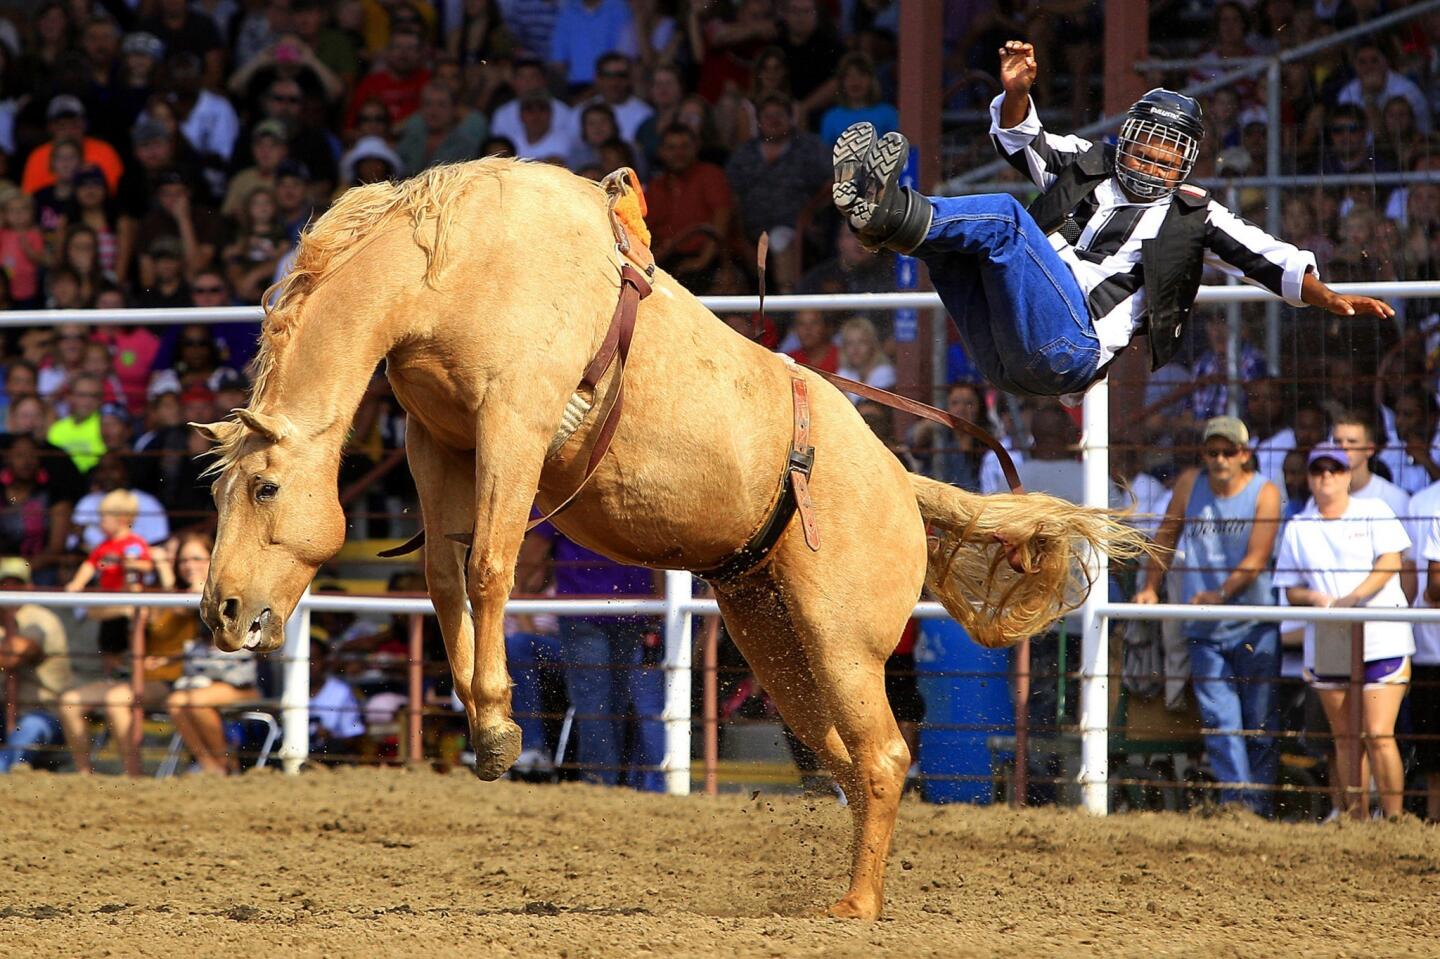 An inmate is thrown from a bronco while participating in the bareback riding competition during the prison rodeo held at the Louisiana State Penitentiary.